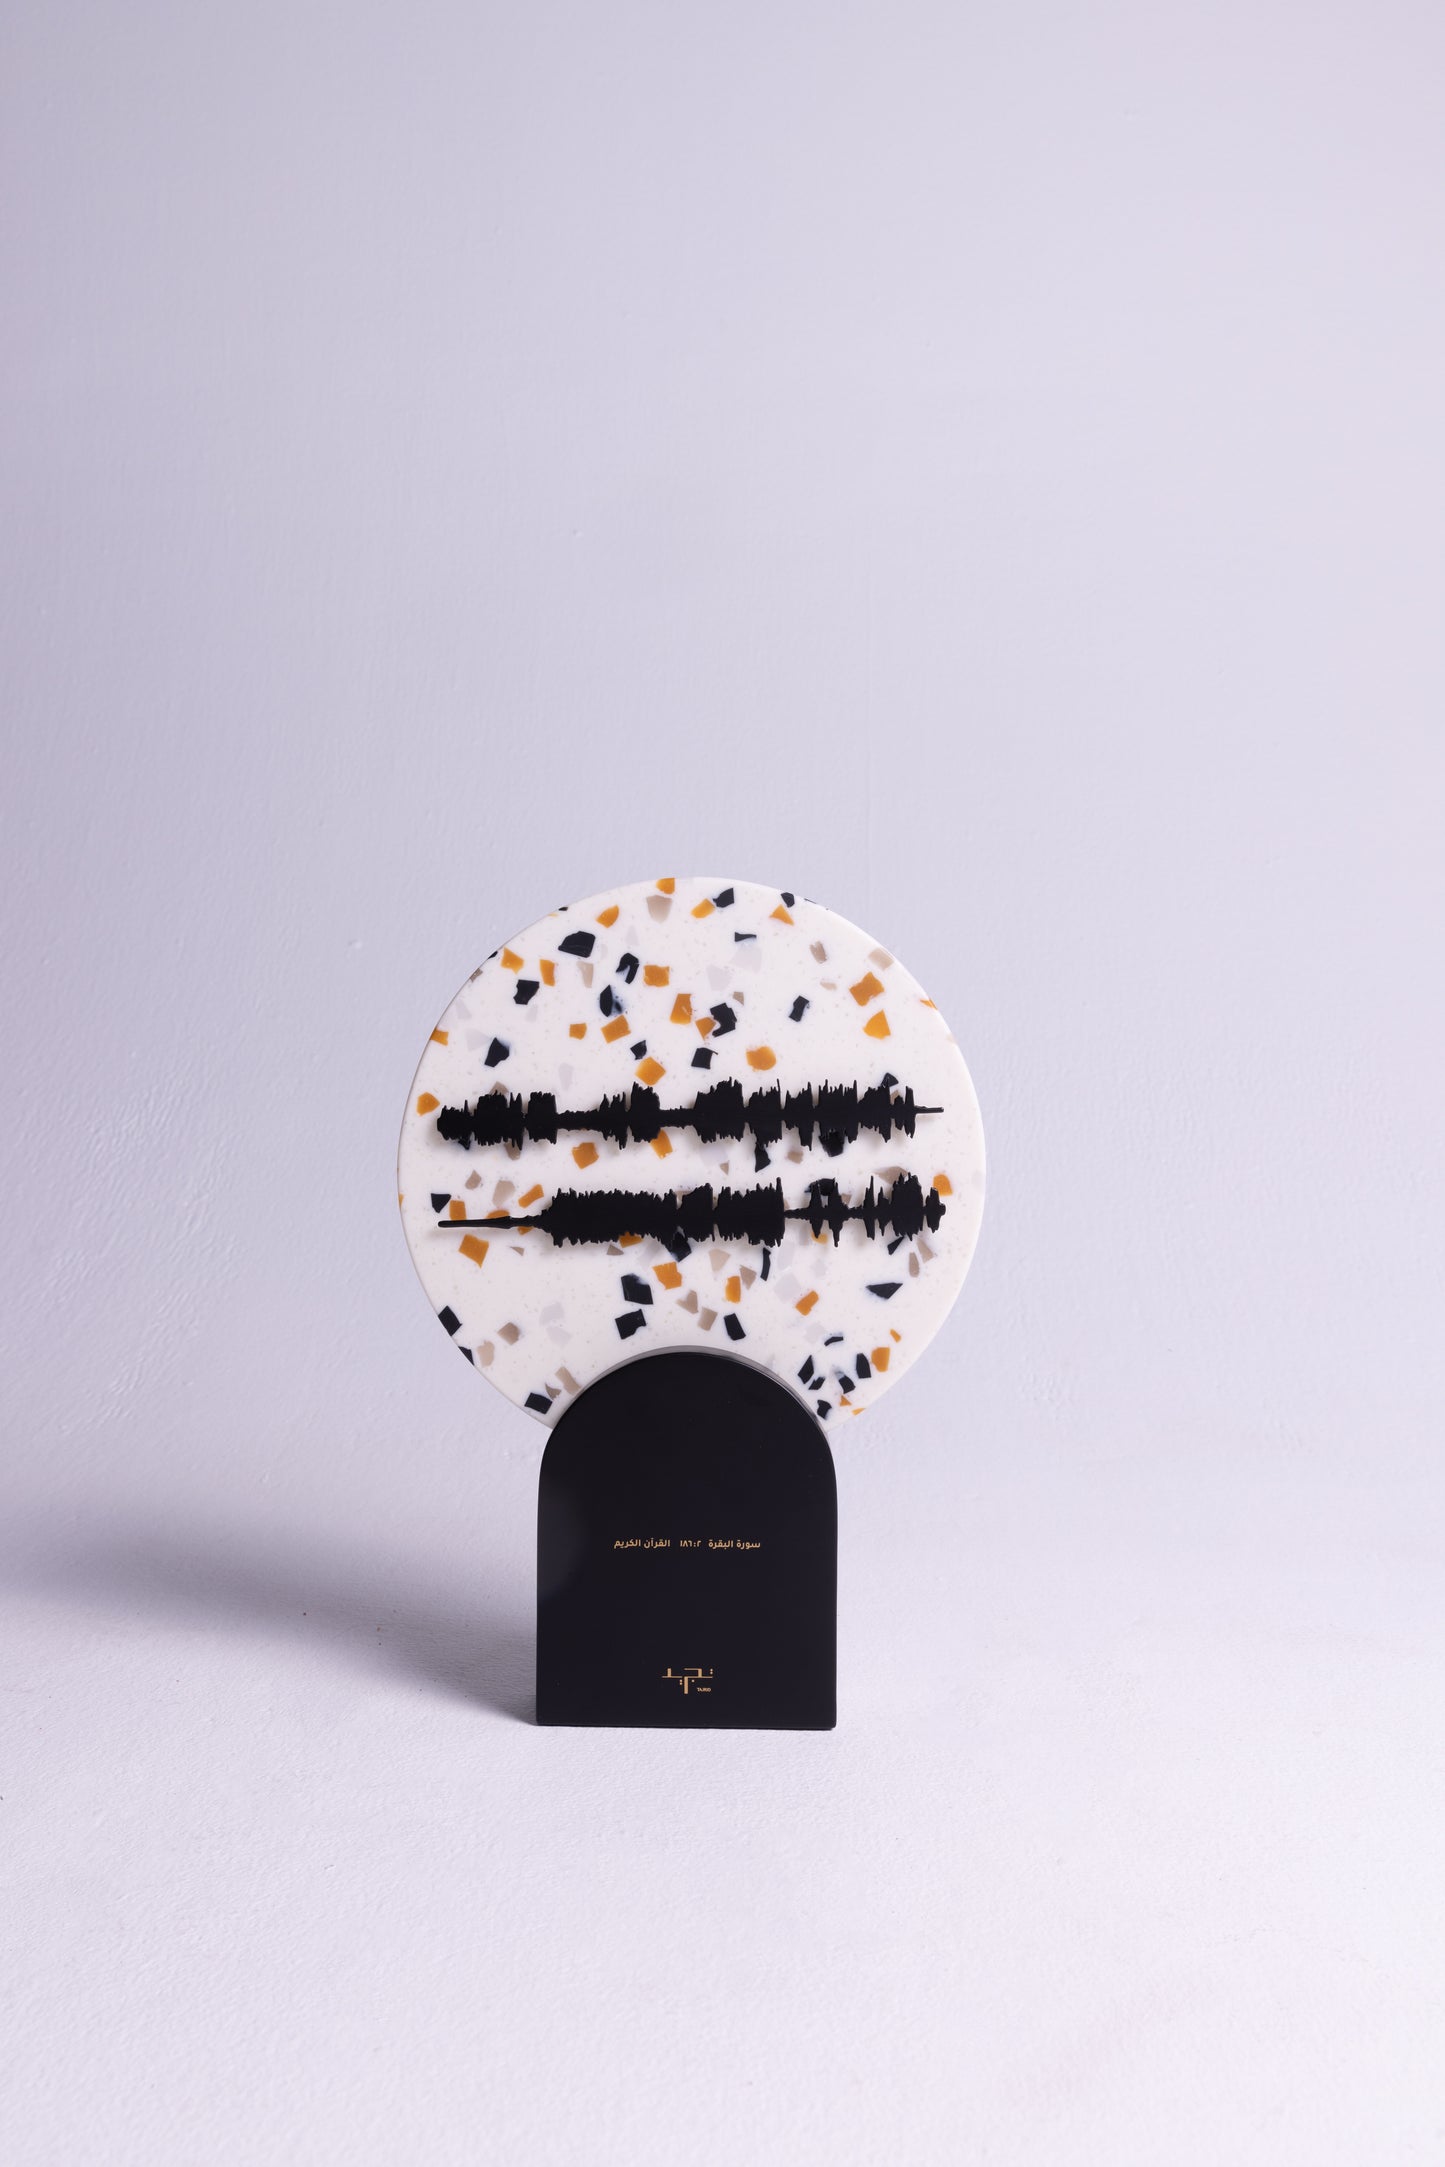 Qura'an abstract Decorative accents as soundwaves